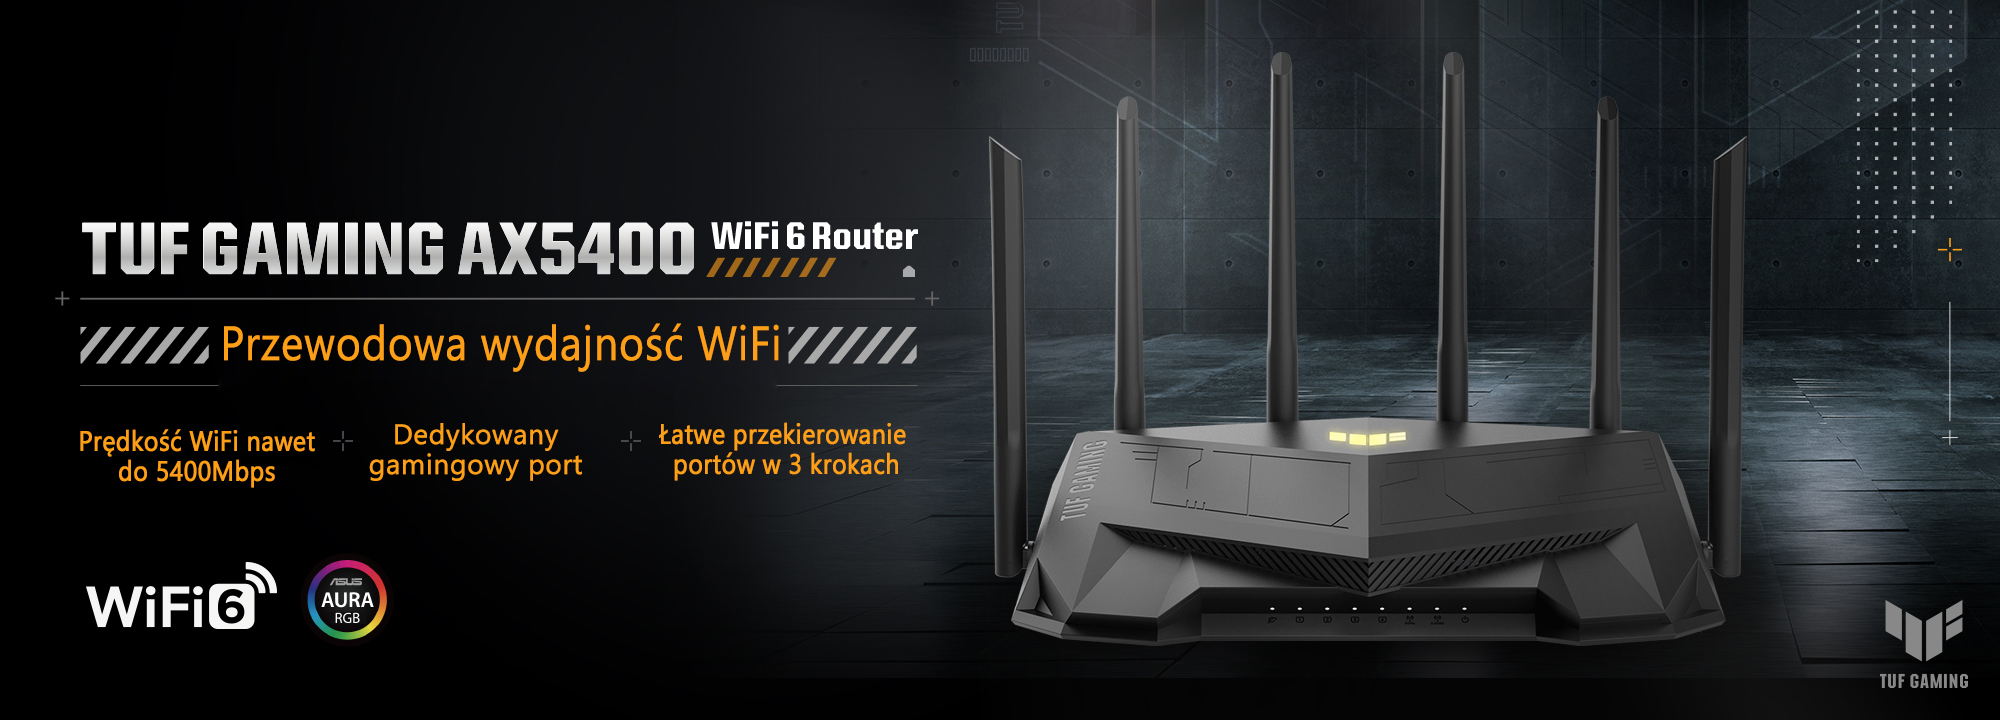 TUF Gaming AX5400 Router